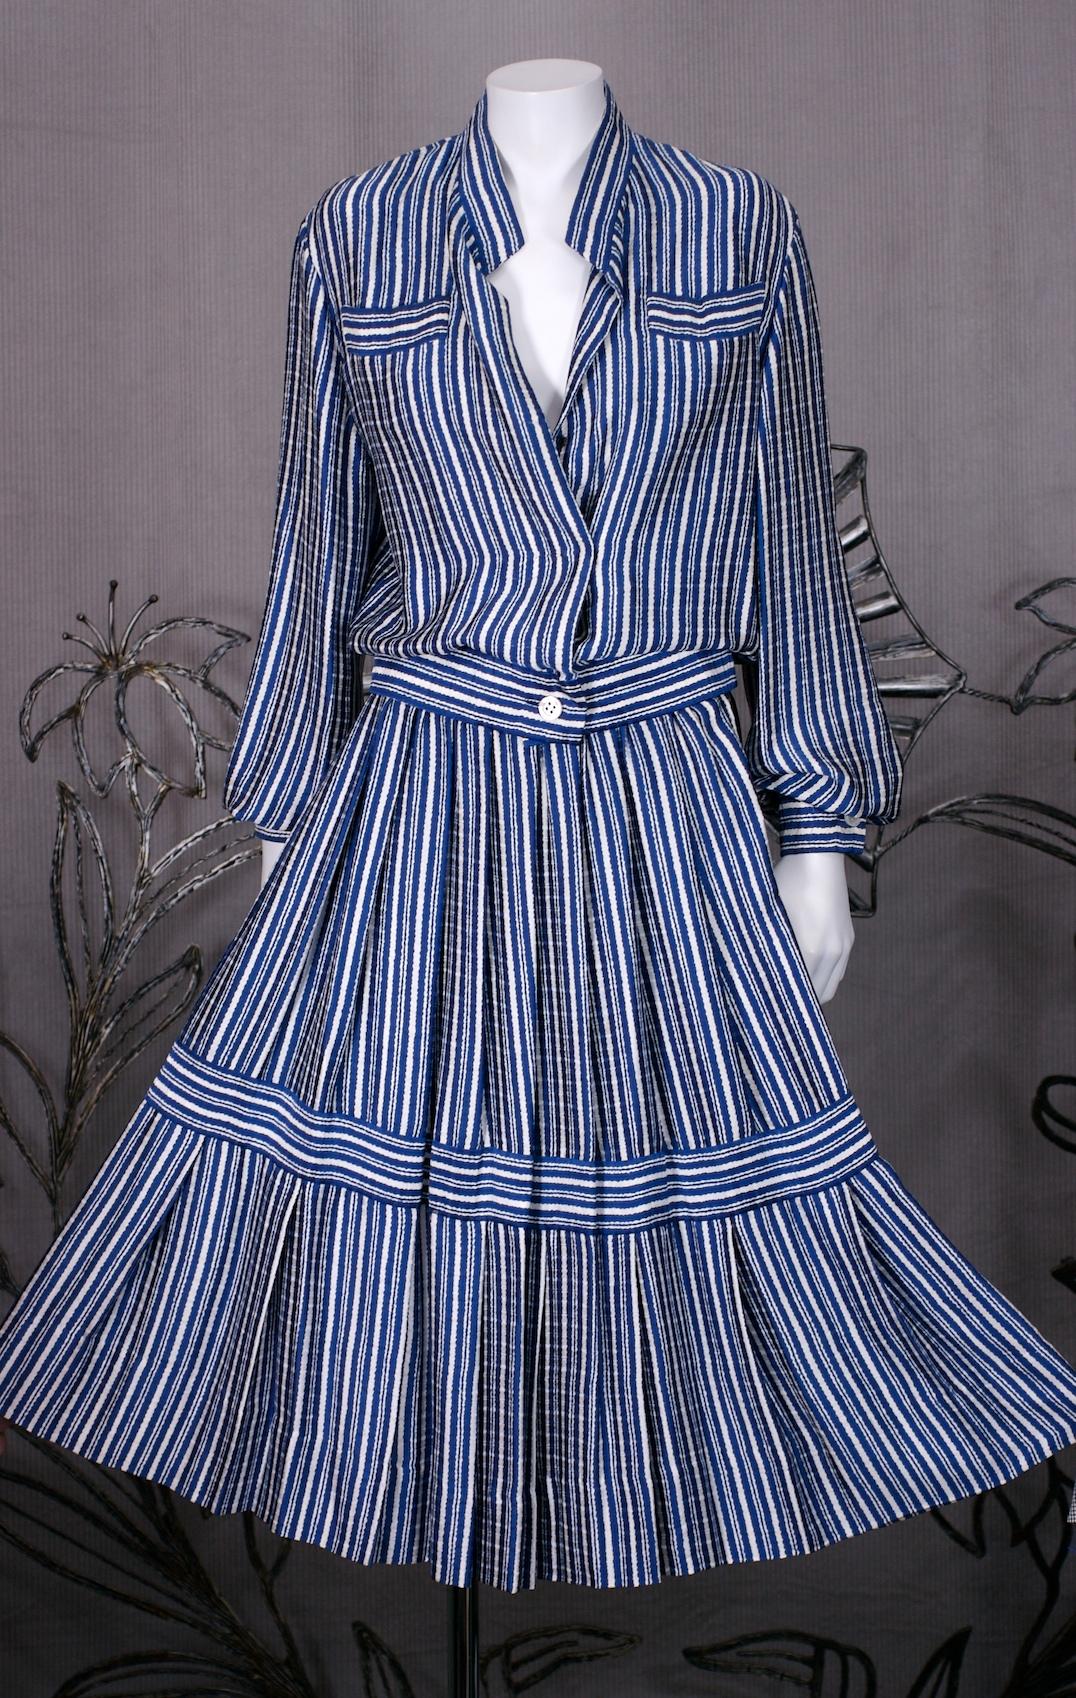 James Galanos Silk Crepe Striped 2 Pc Dress in printed silk crepe. Blue and white striped print is crafted into a blouson blouse and full pleated skirt. Covered front placket with mother of pearl buttons. Skirt is gathered at waist and a series of